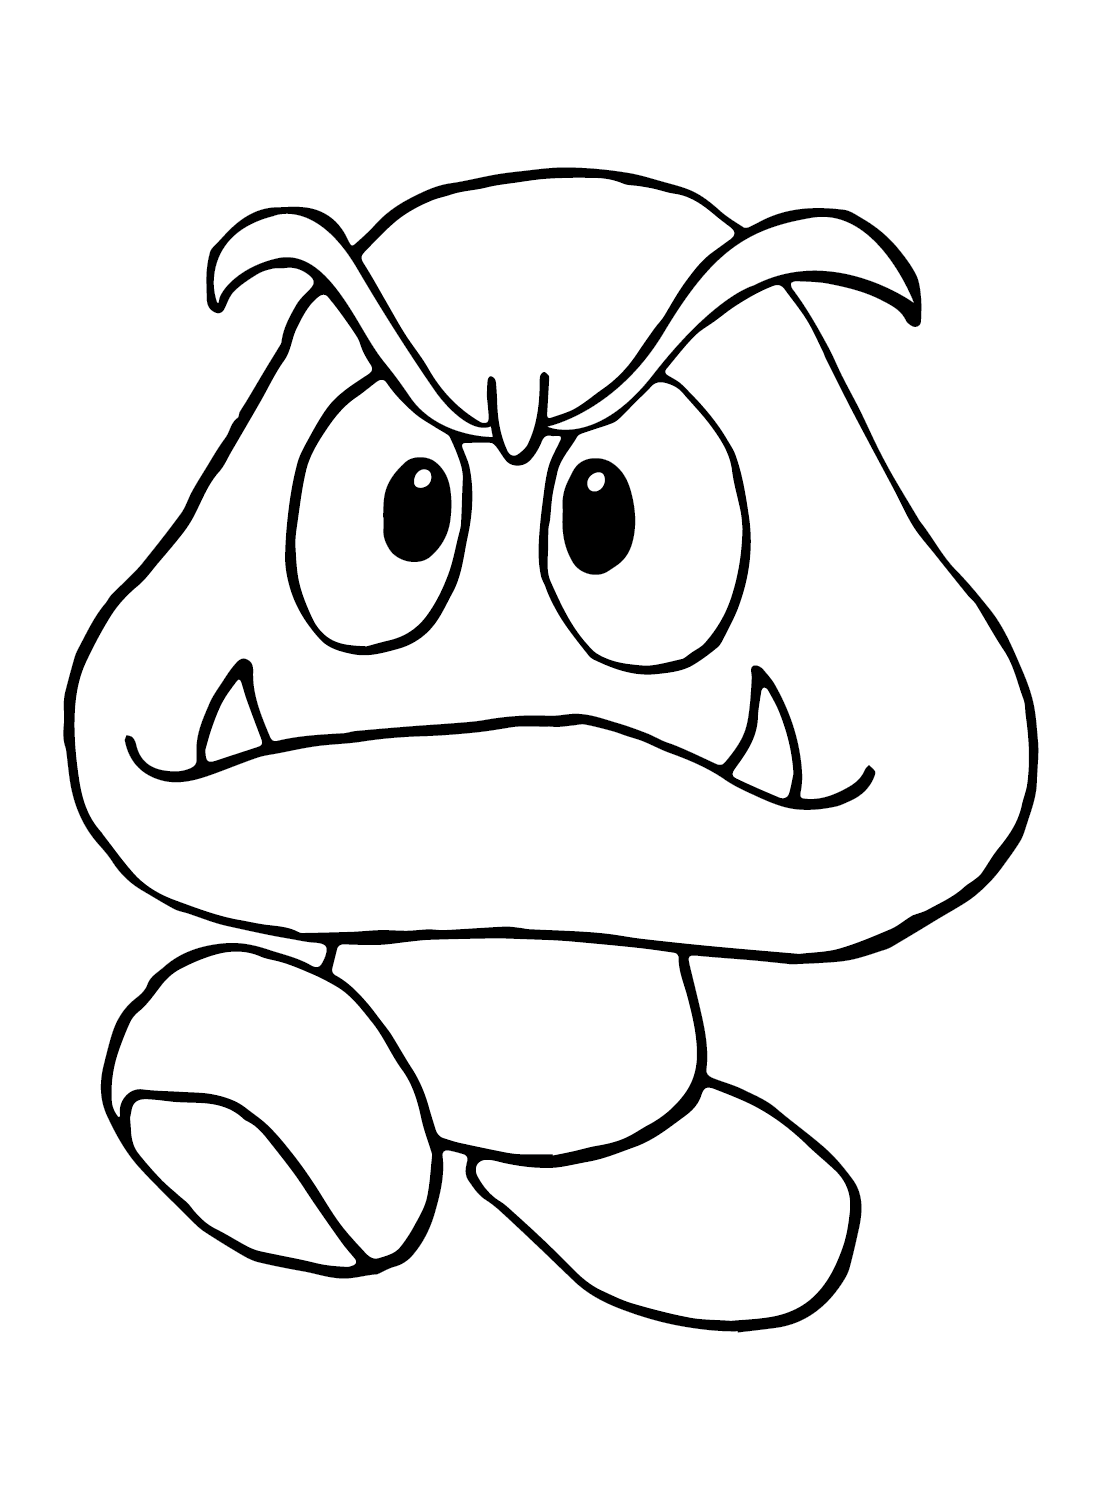 Drawing Goomba Coloring Page - Free Printable Coloring Pages